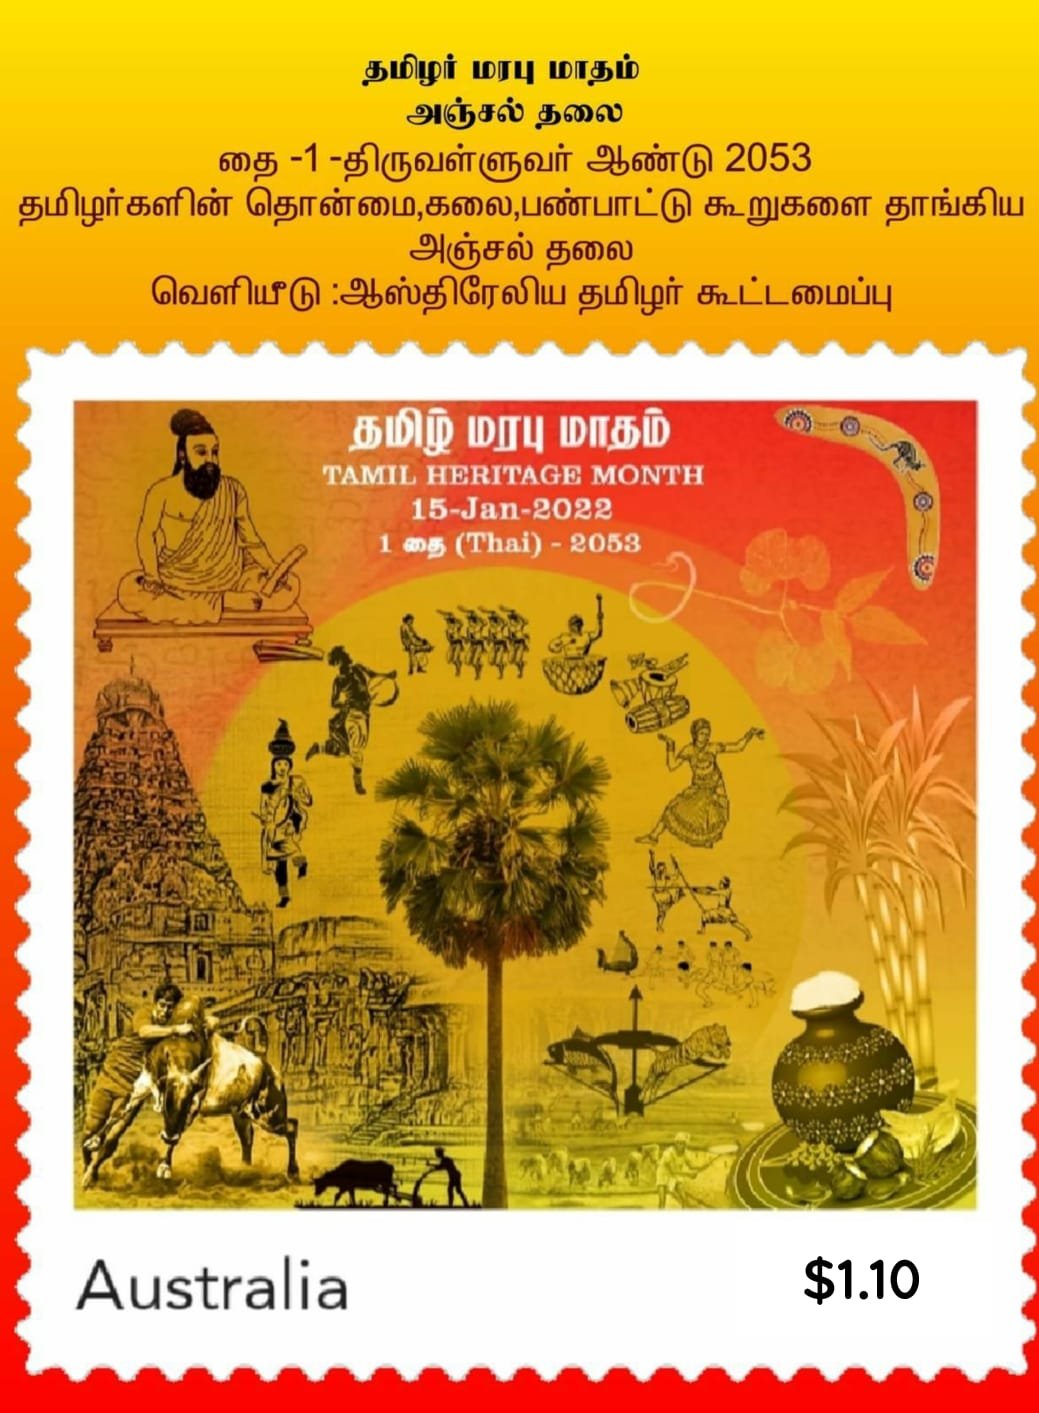 tamil-heritage-month-stamp-release-ceremony-ata